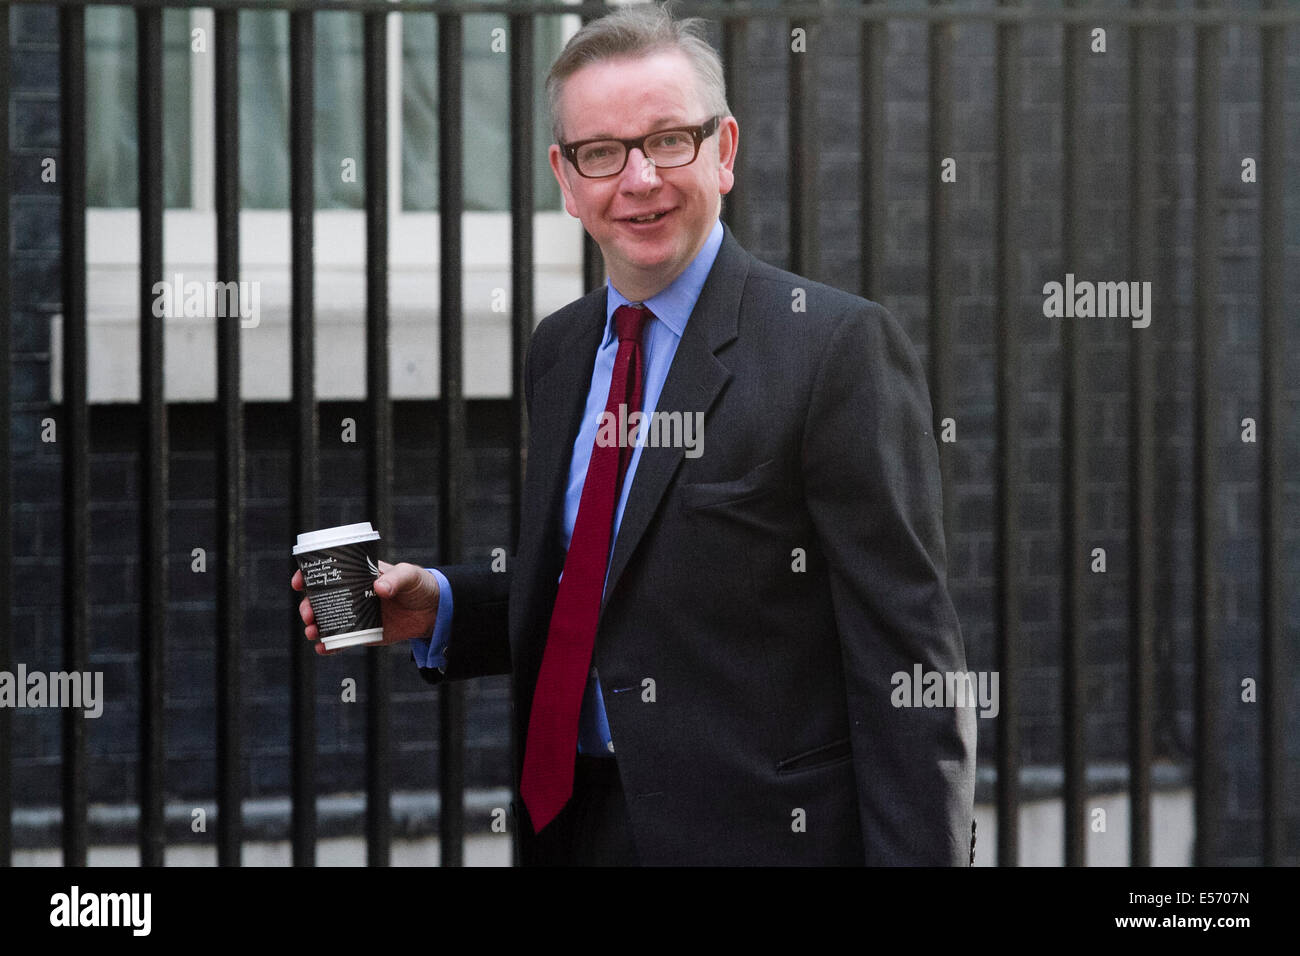 London, UK. 22nd July, 2014. Michael Gove Conservative Party Chief ...